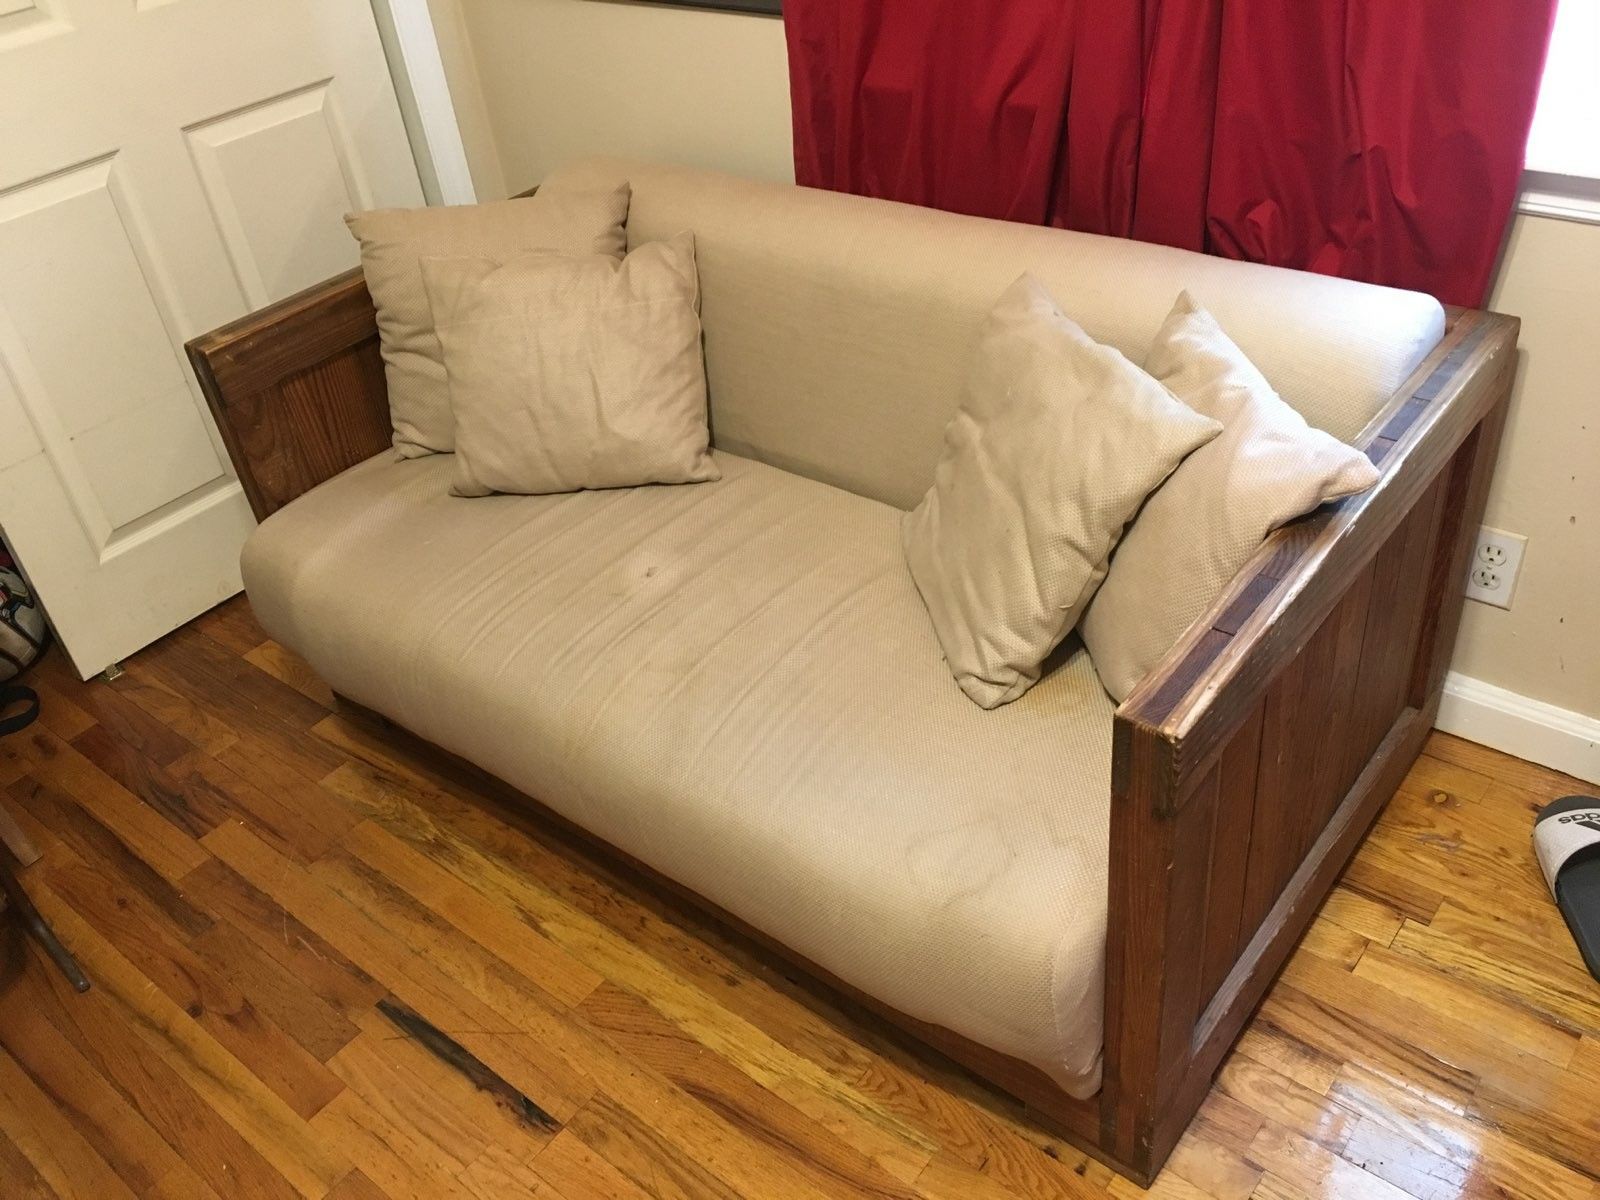 This end up couch